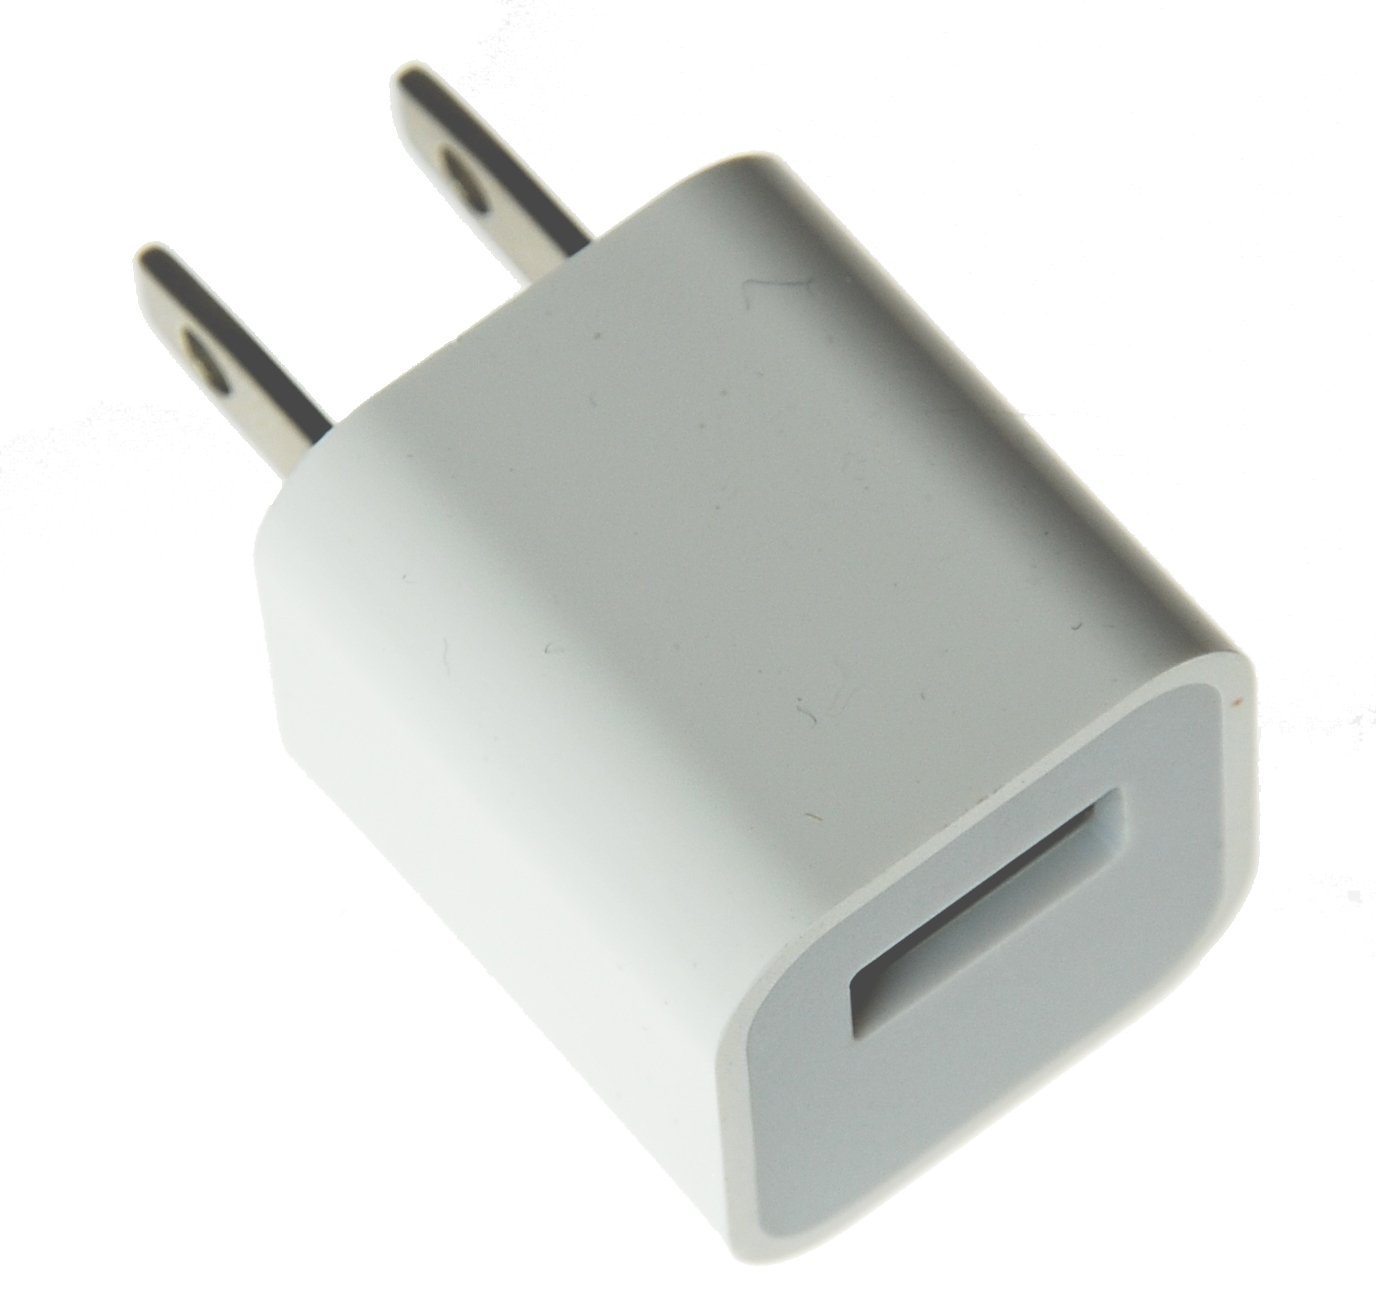 USB Power Adapter for iPhone and iPod